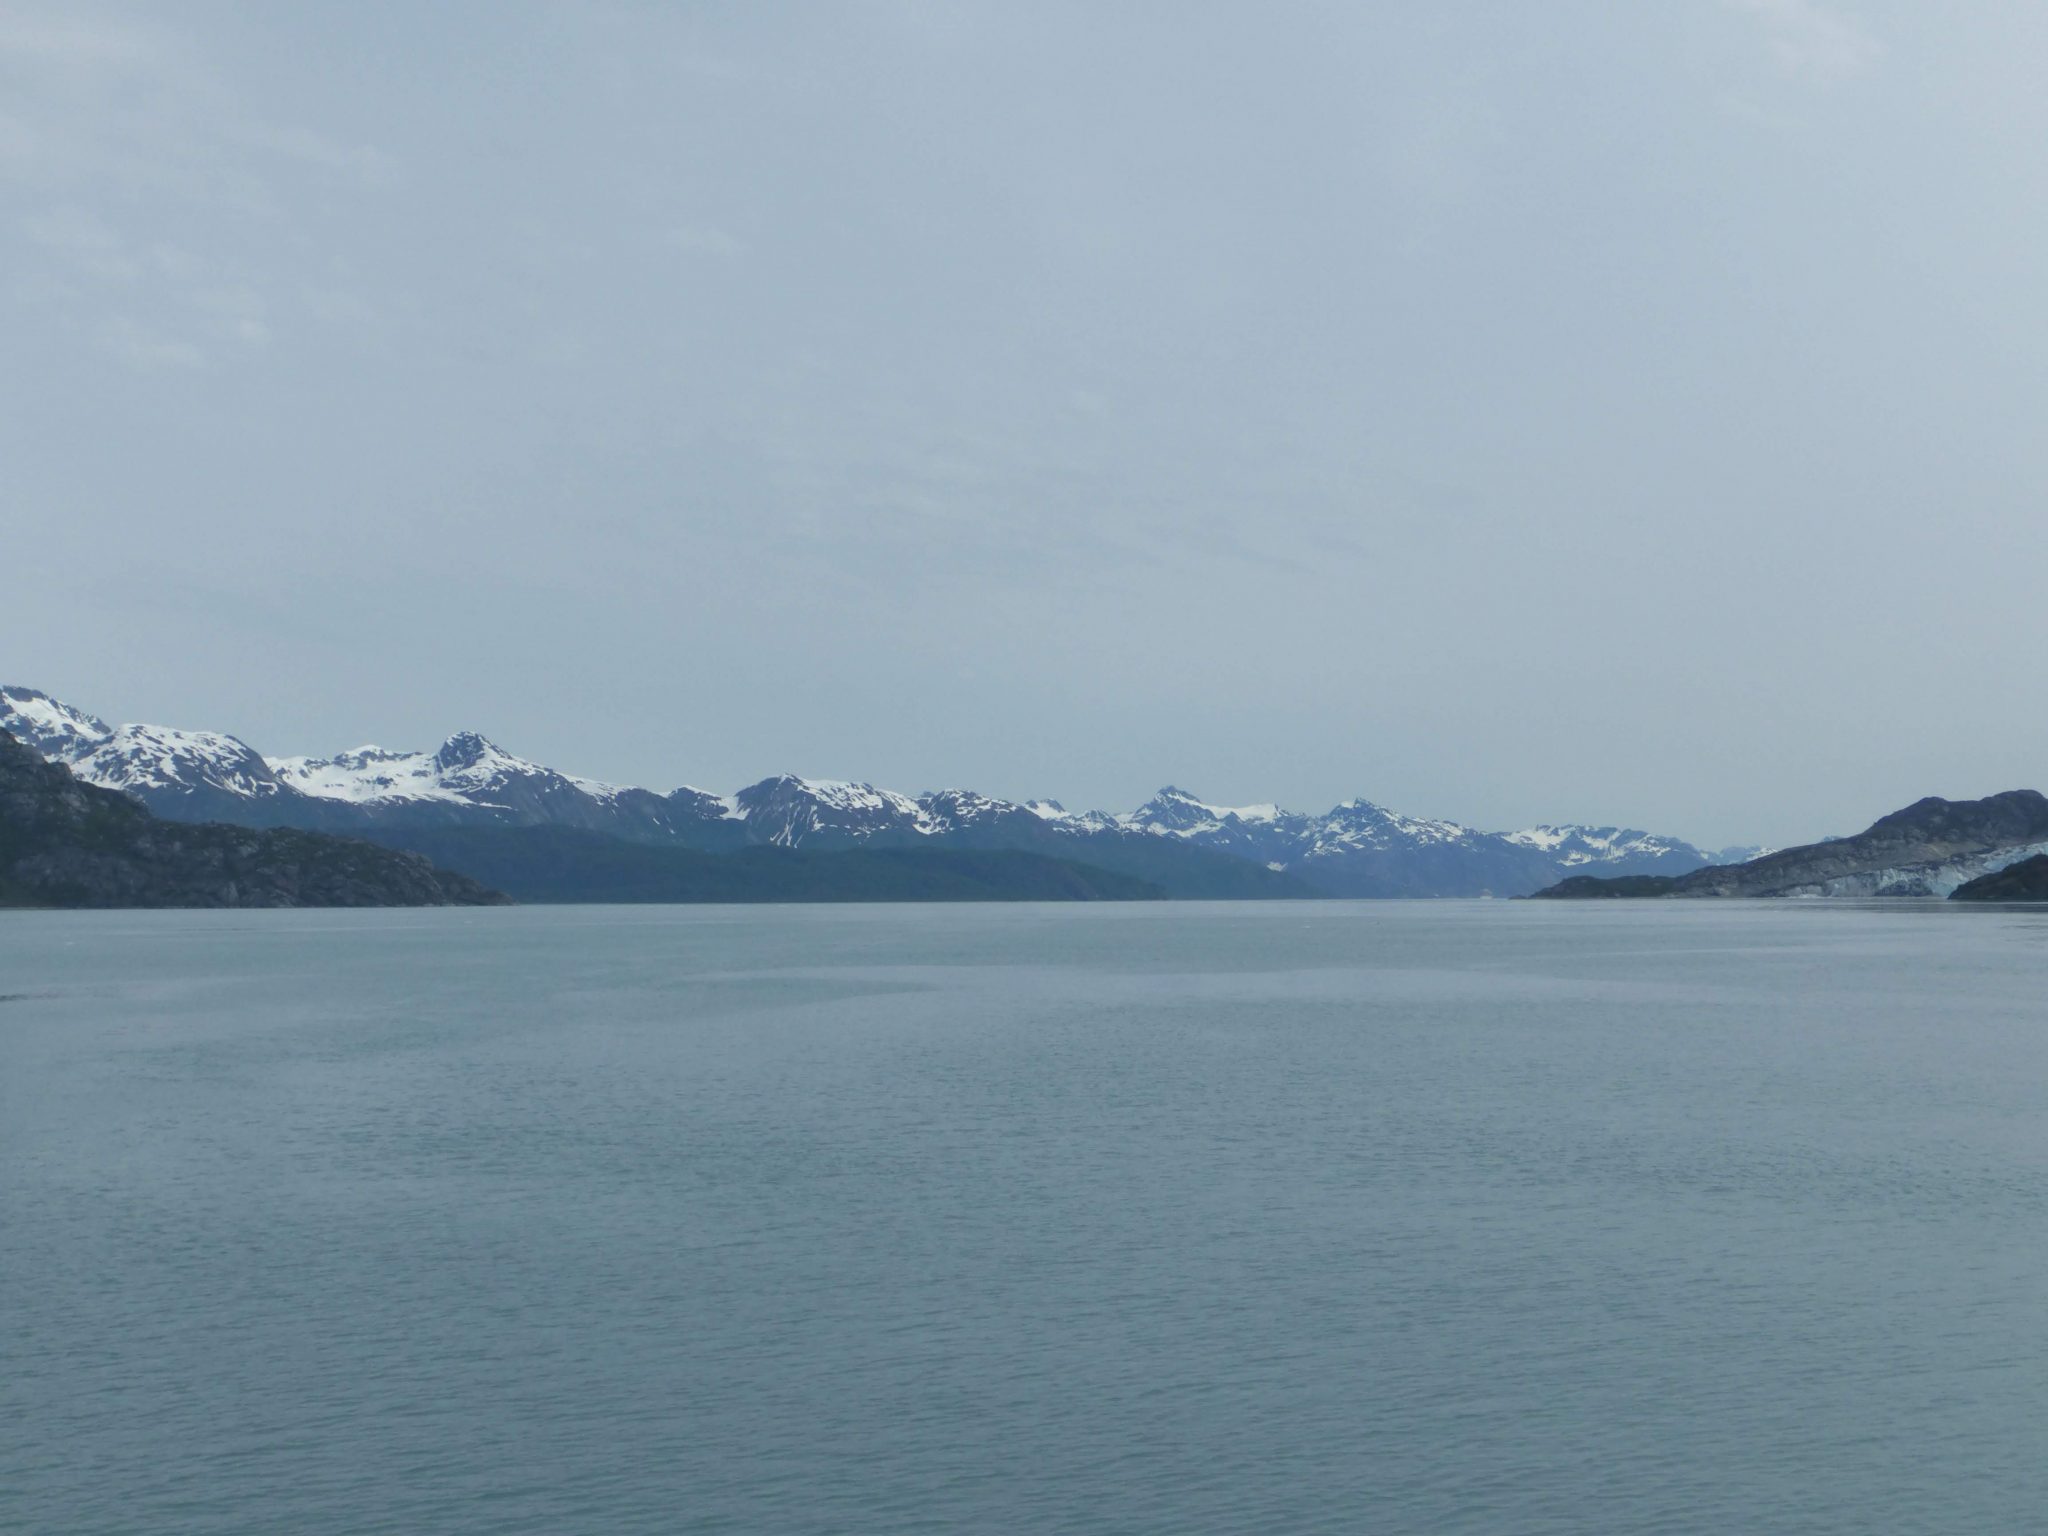 Distant snow capped mountains frame the water of Glacier Bay